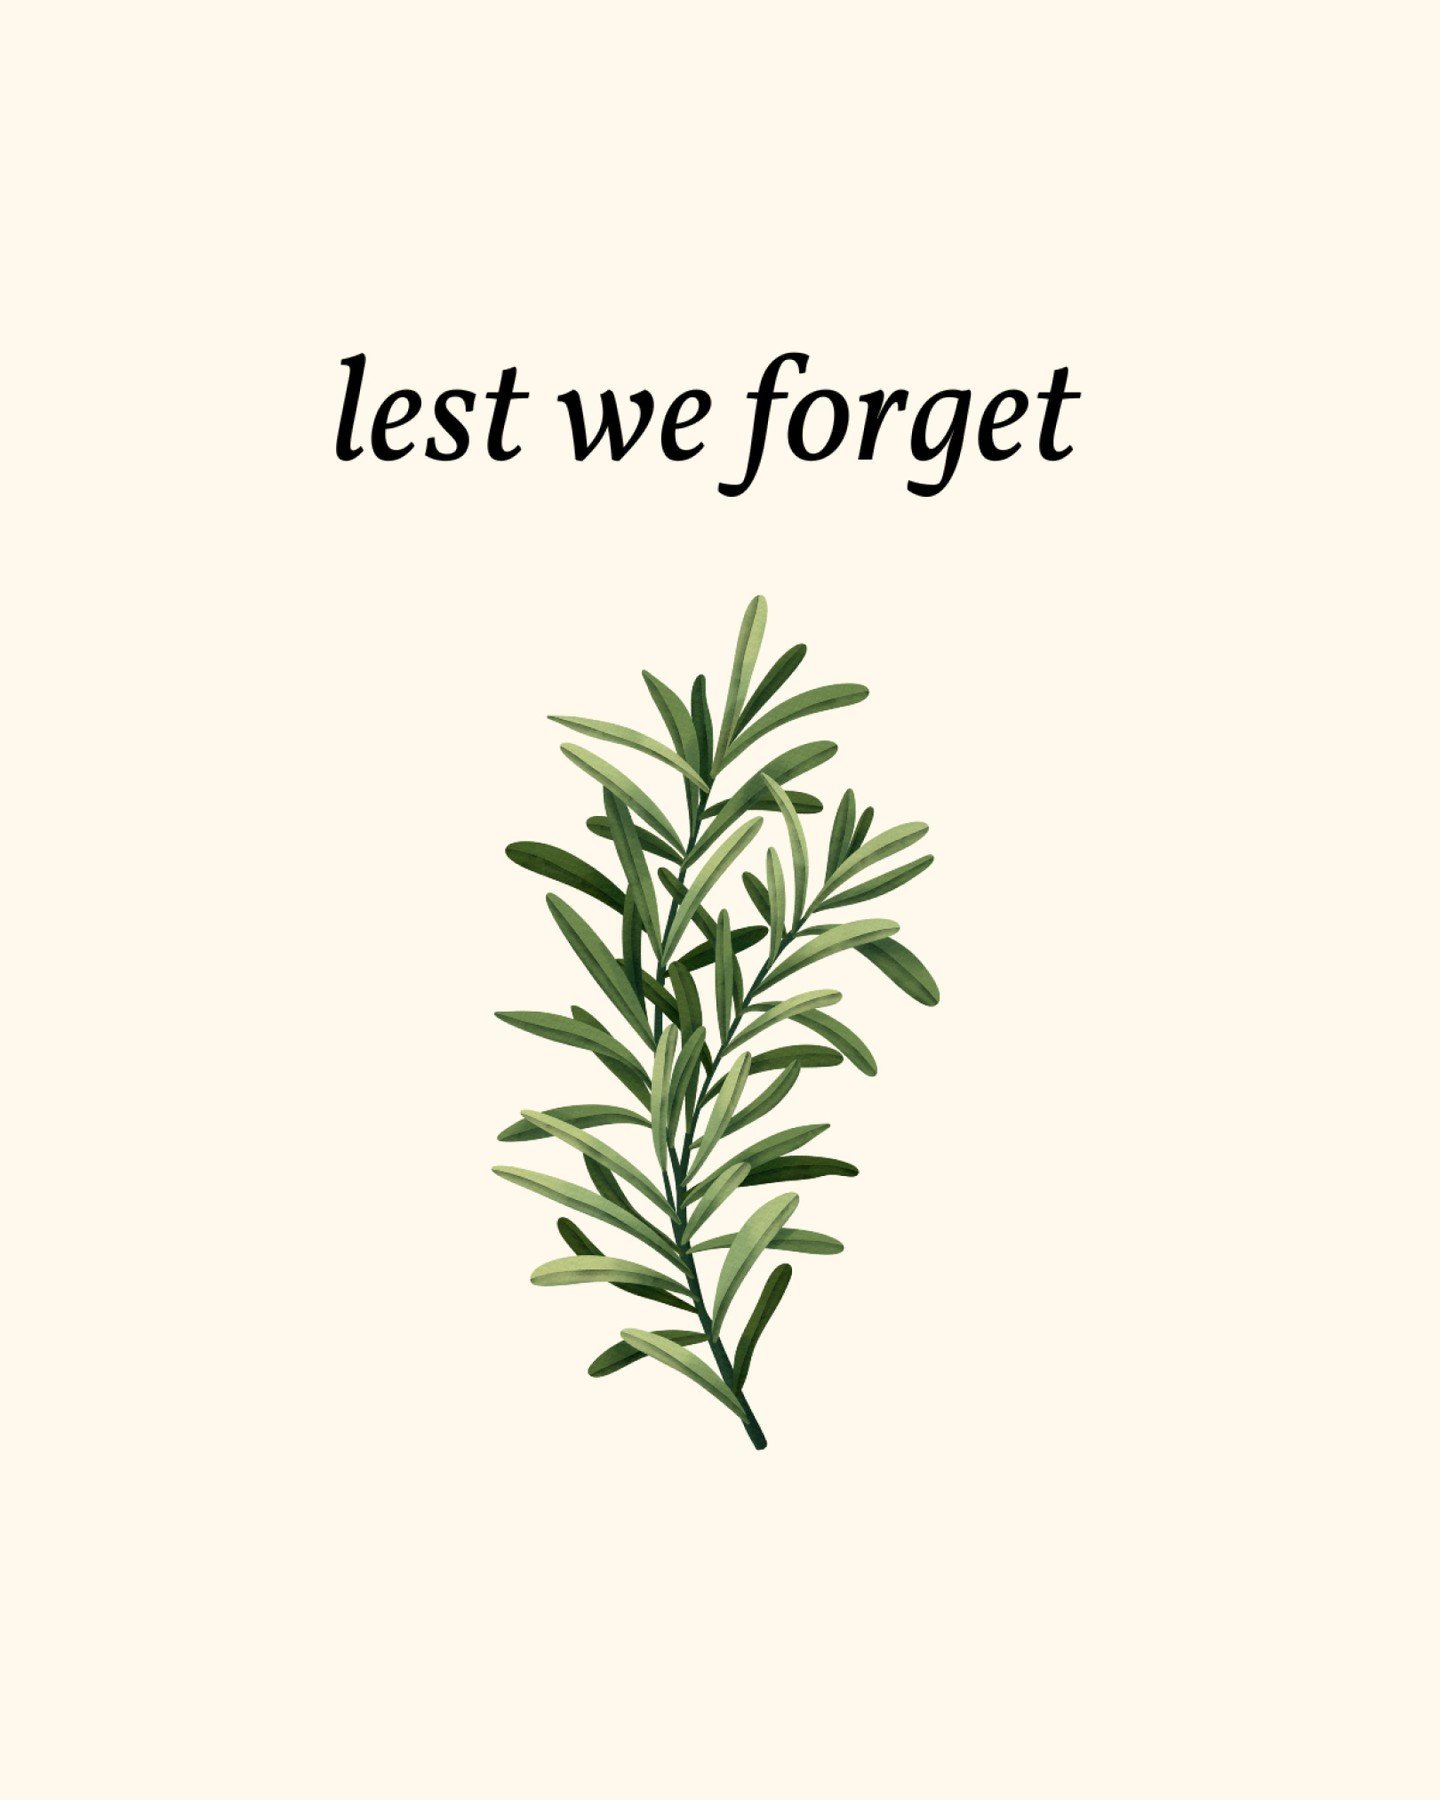 They shall grow not old, as we that are left grow old;
Age shall not weary them, nor the years condemn.
At the going down of the sun and in the morning,
We will remember them.

Lest we forget.

#wewillrememberthem #lestweforget #anzacday2024